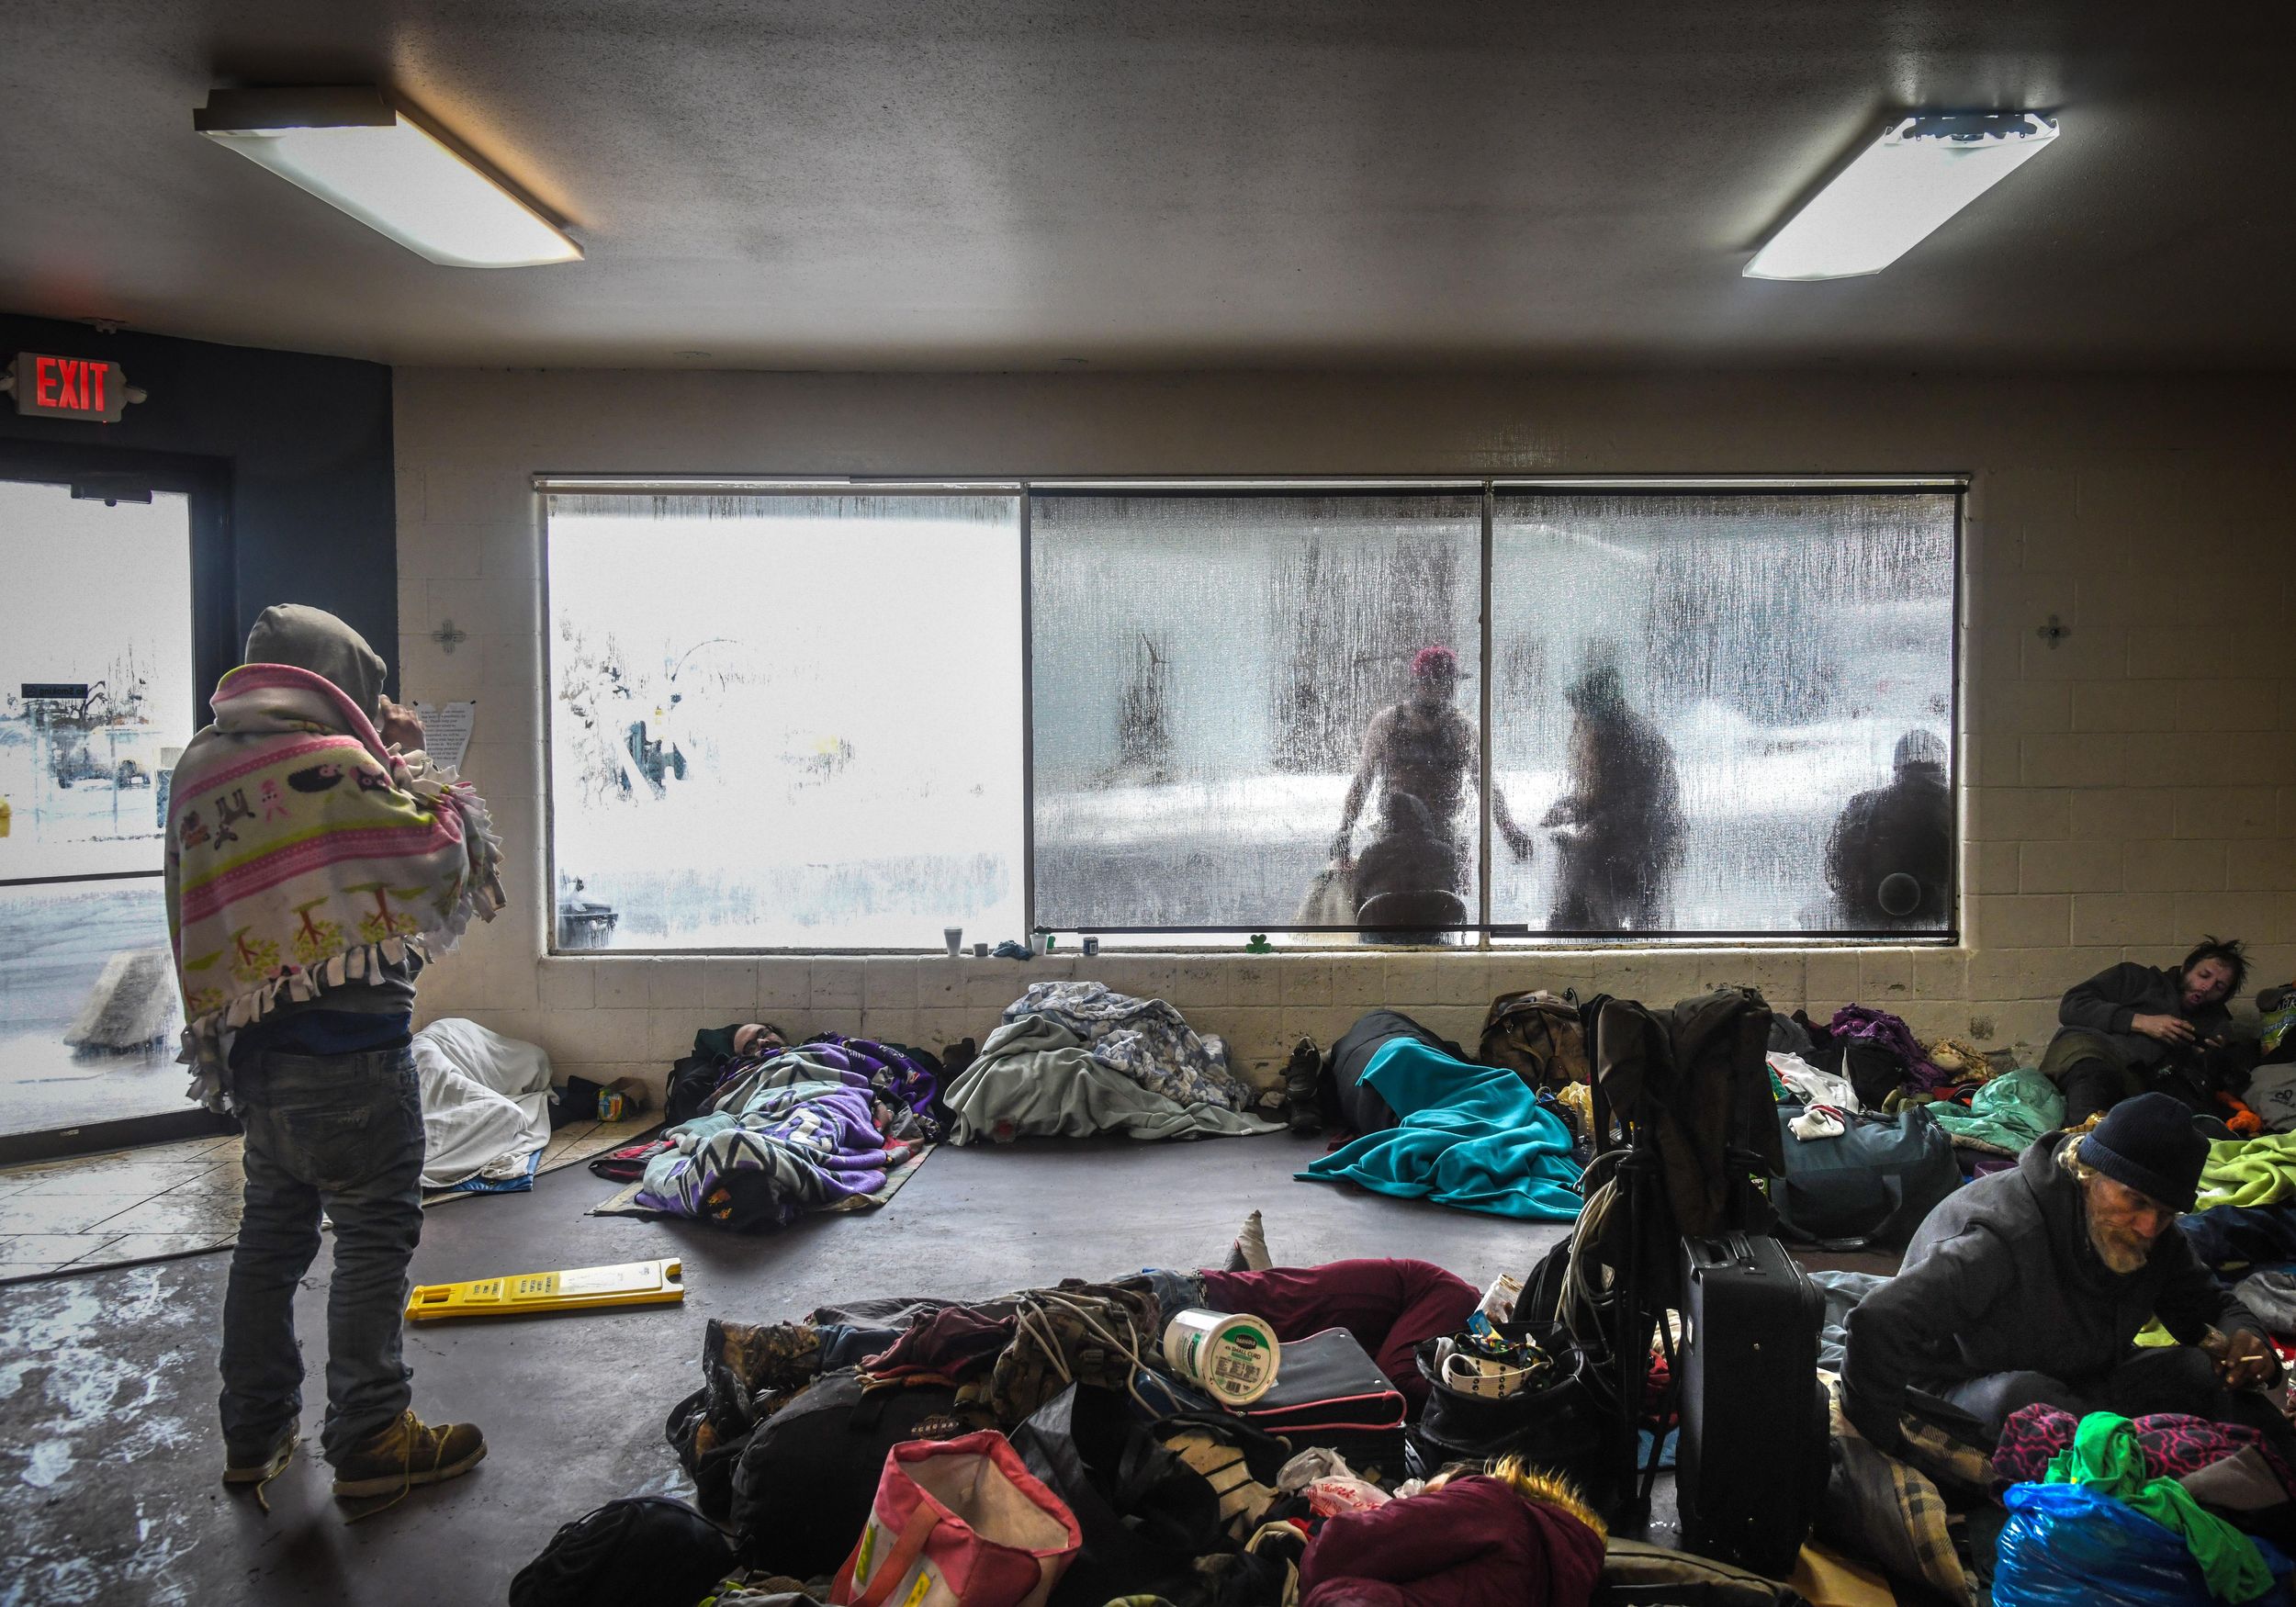 As Economies Grow So Does Homelessness In Cities Like Spokane Evidence Suggests The 1712